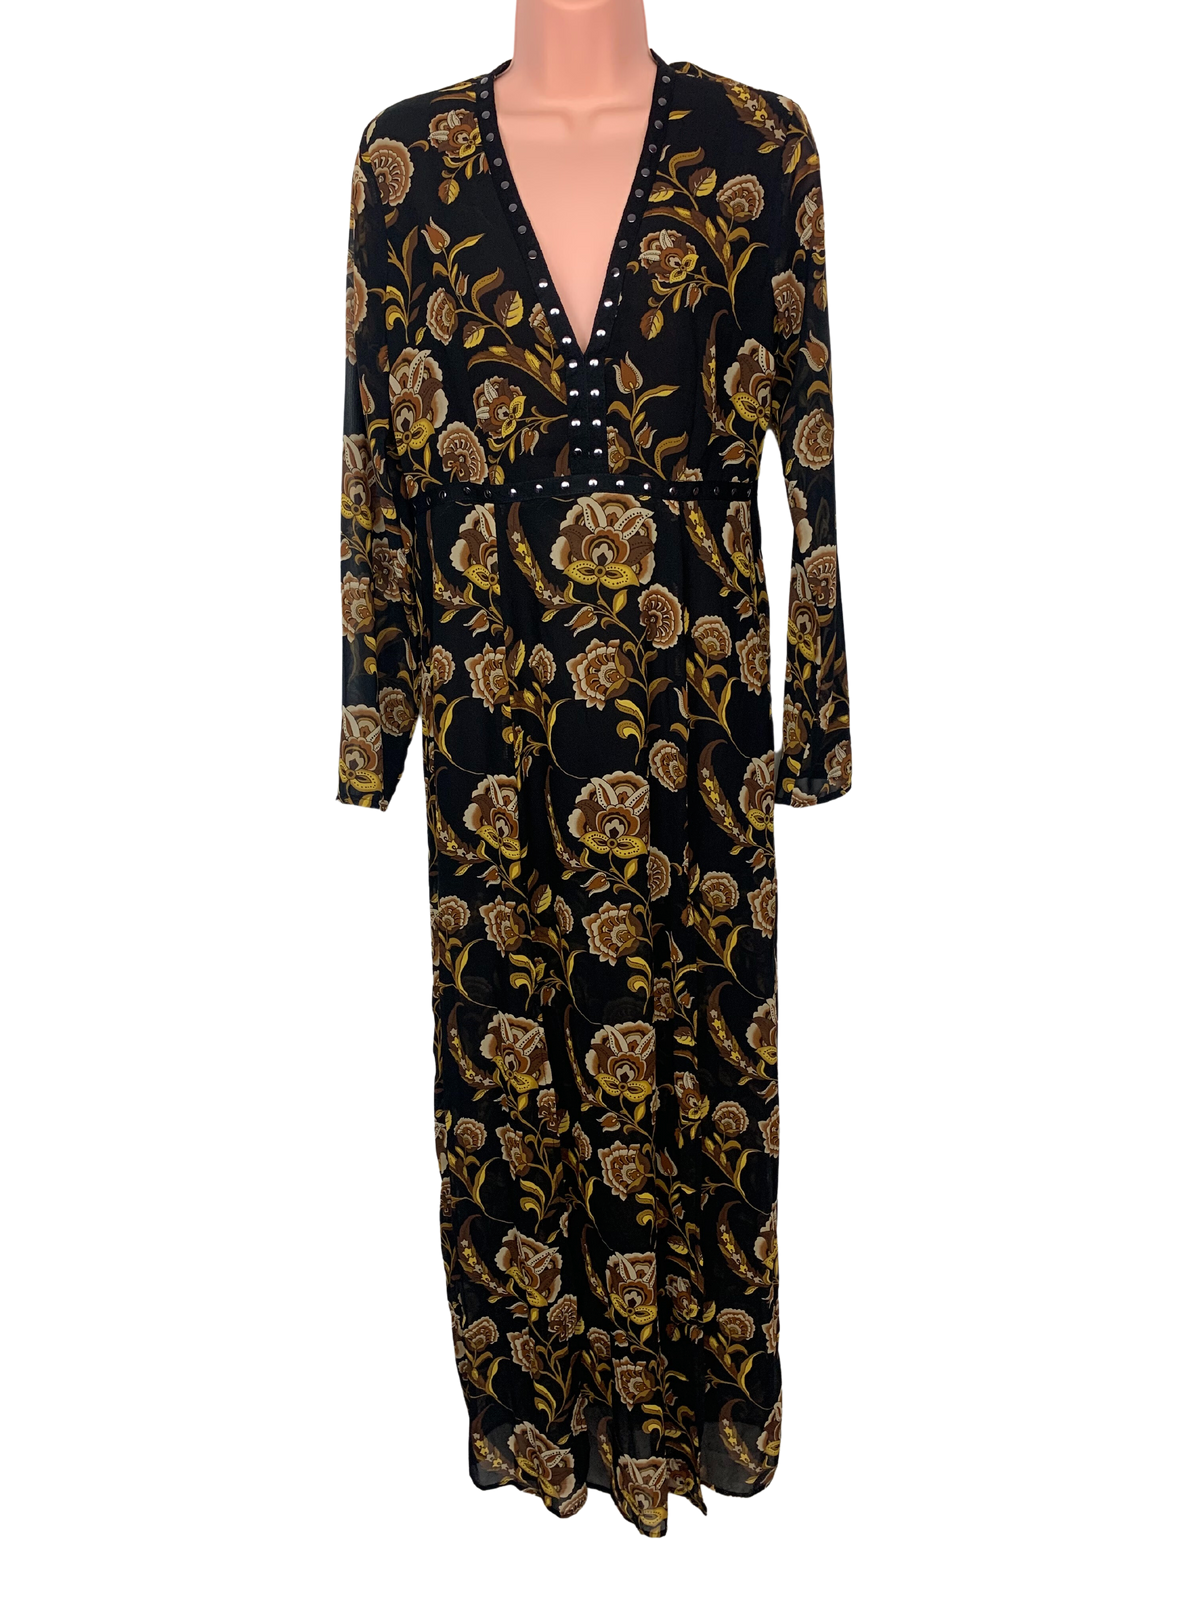 Forever 21 Floral Long Sleeve Maxi Dress Size M